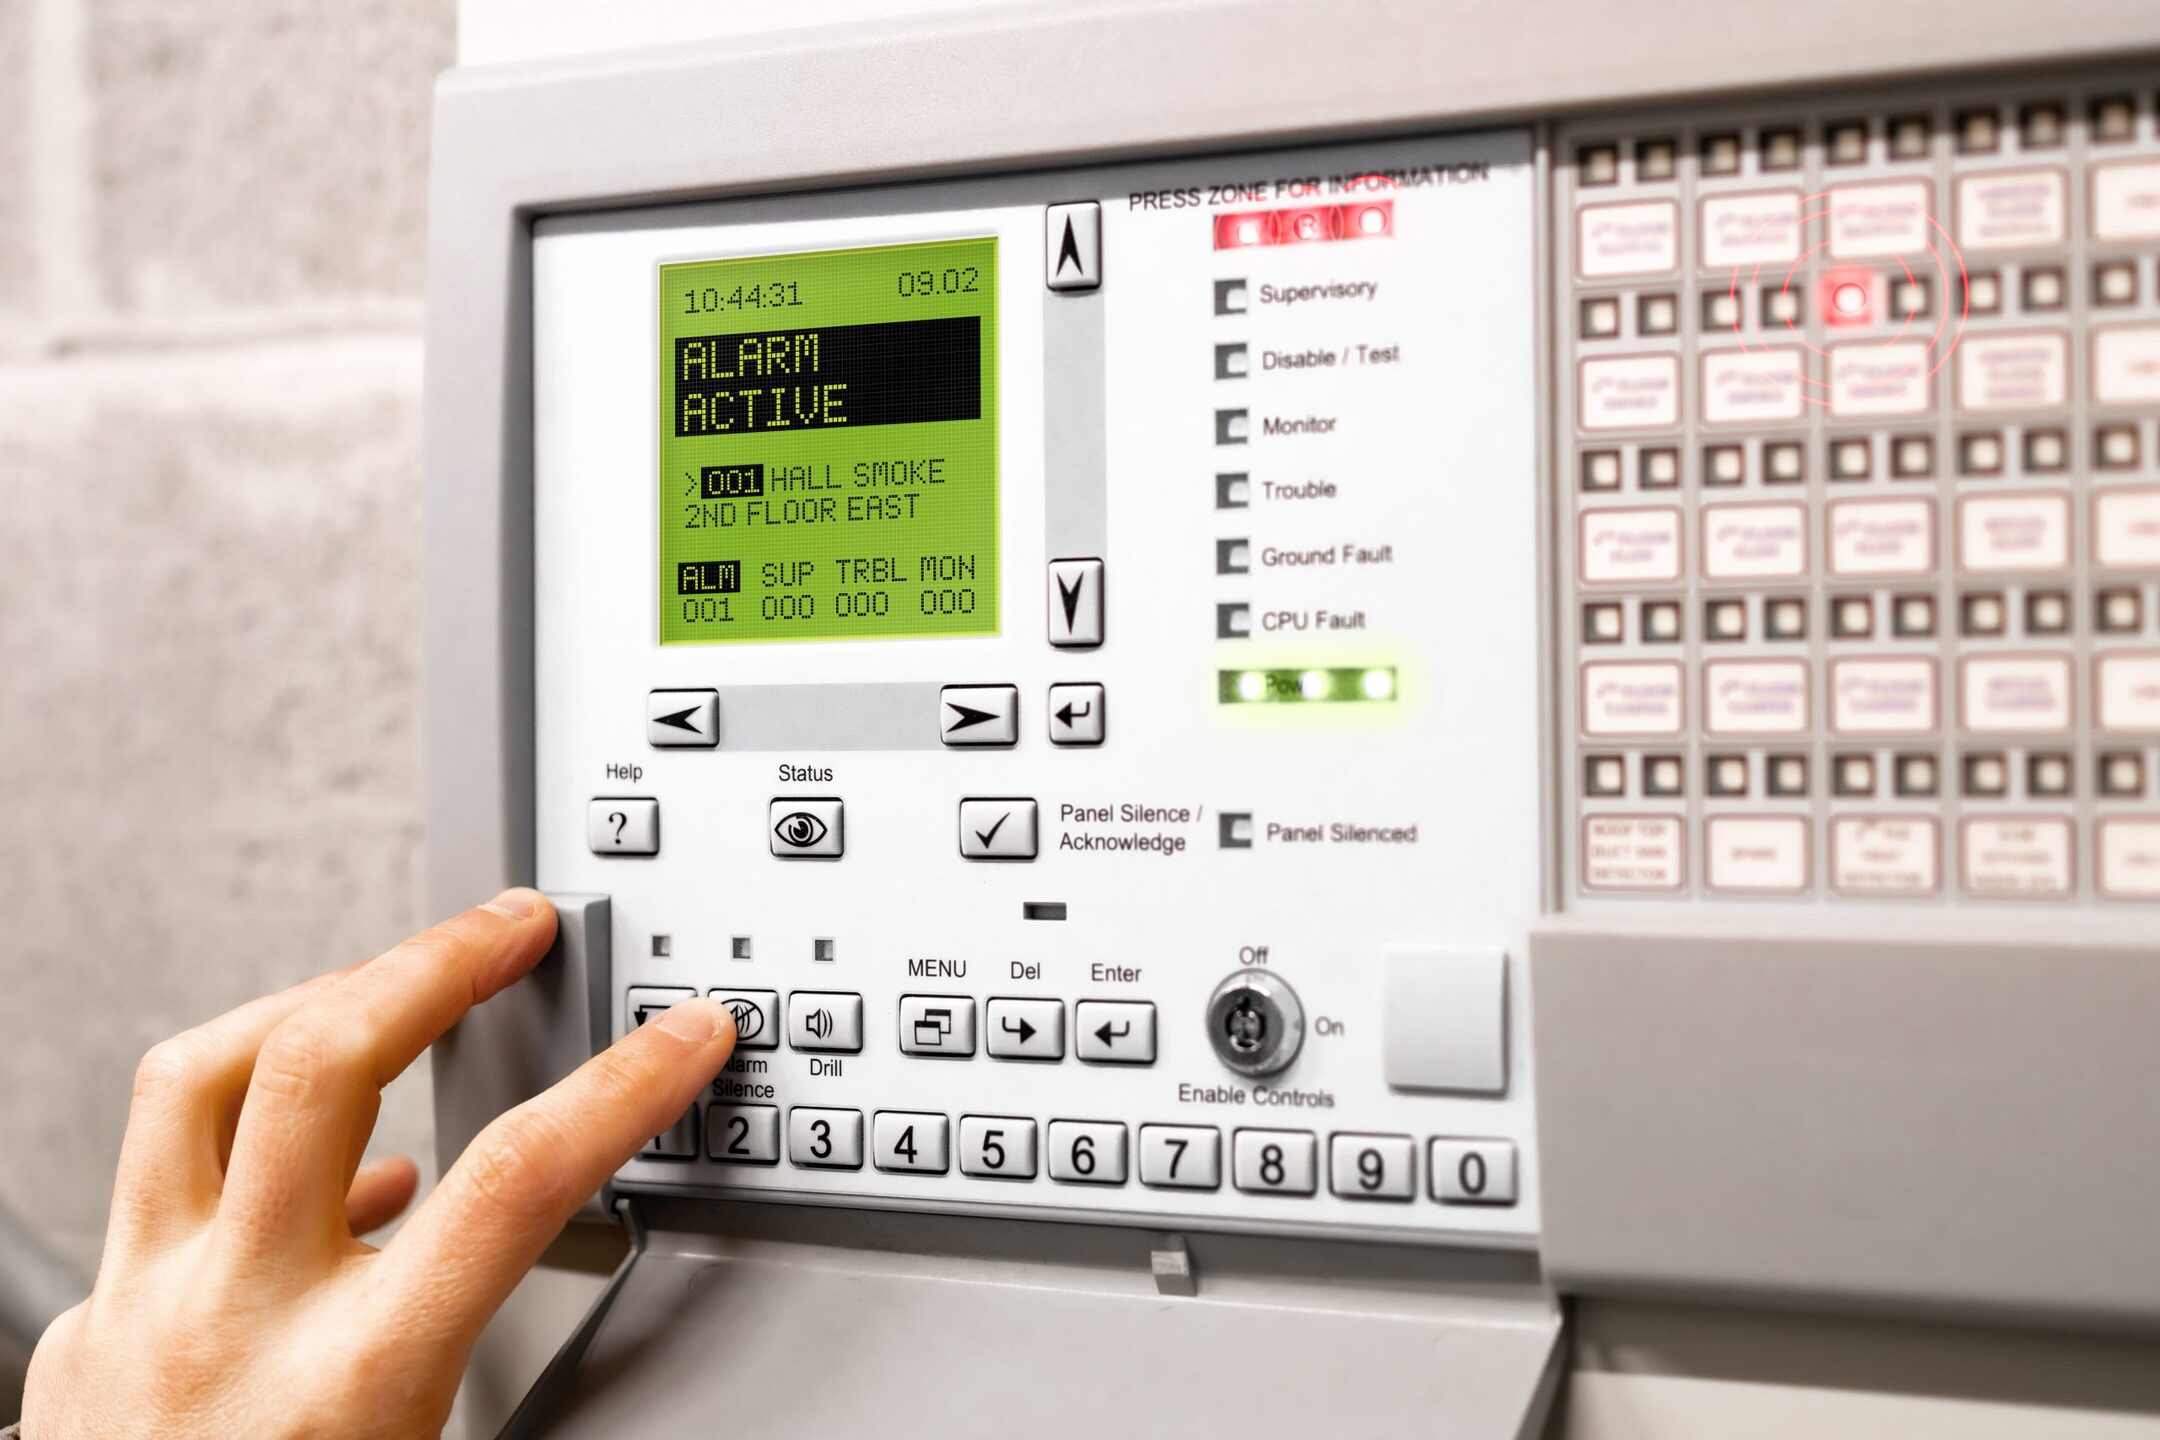 How Are Fire Alarm Systems In Most High-Rise Buildings Programmed To Alert The Occupants?